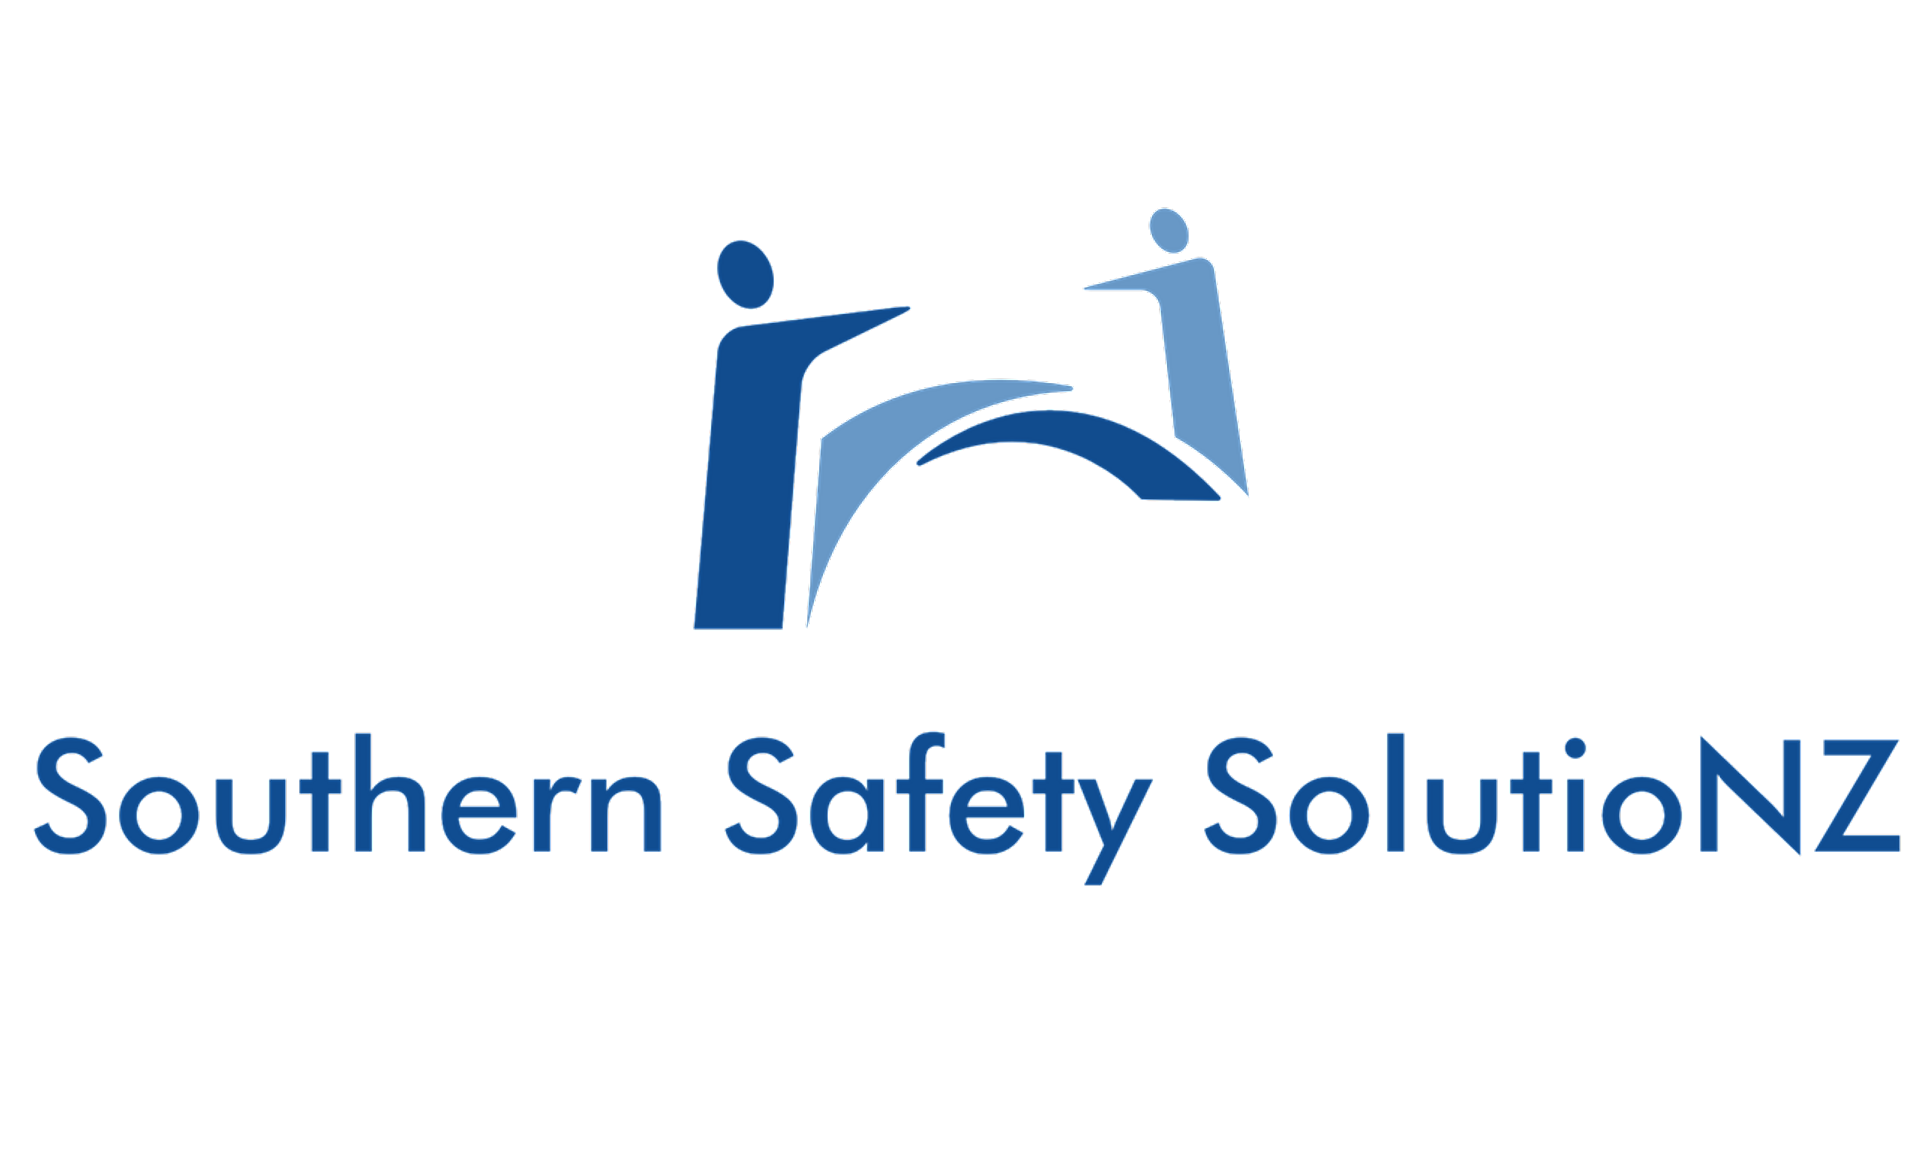 Worker Training Record - Southern Safety SolutioNZ